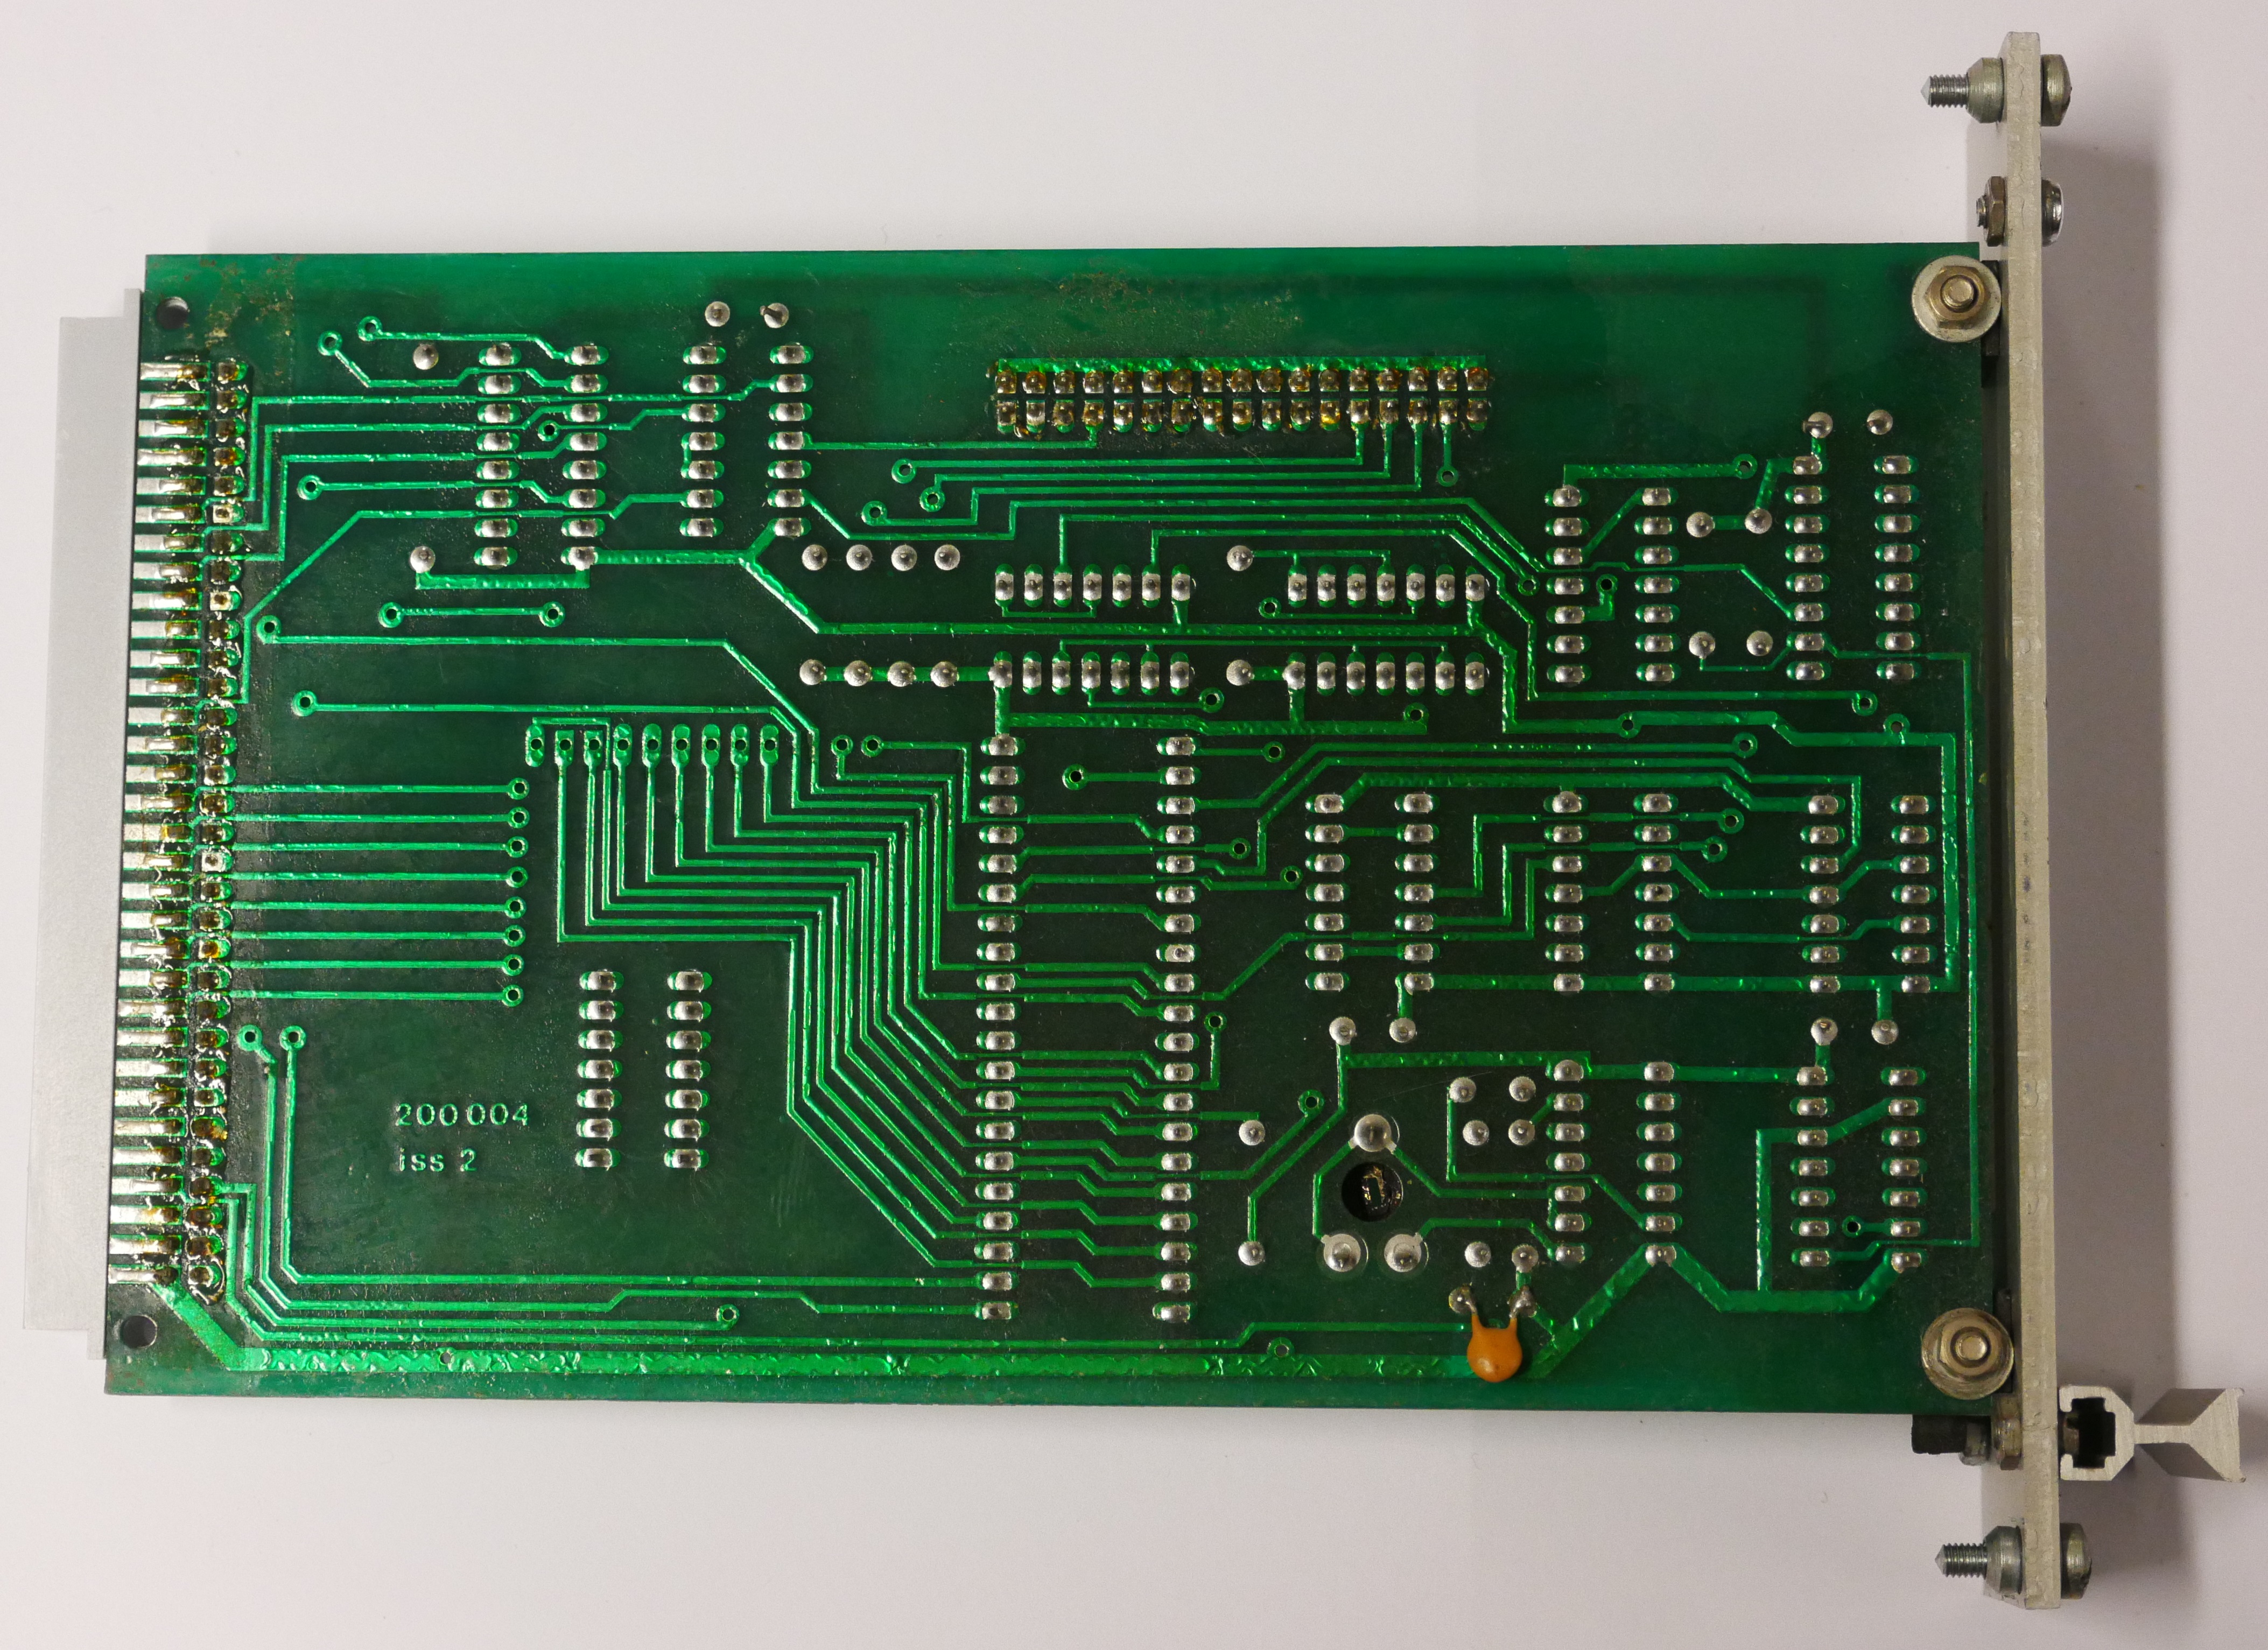 Acorn System FDC Floppy Disk Controller PCB Issue 2